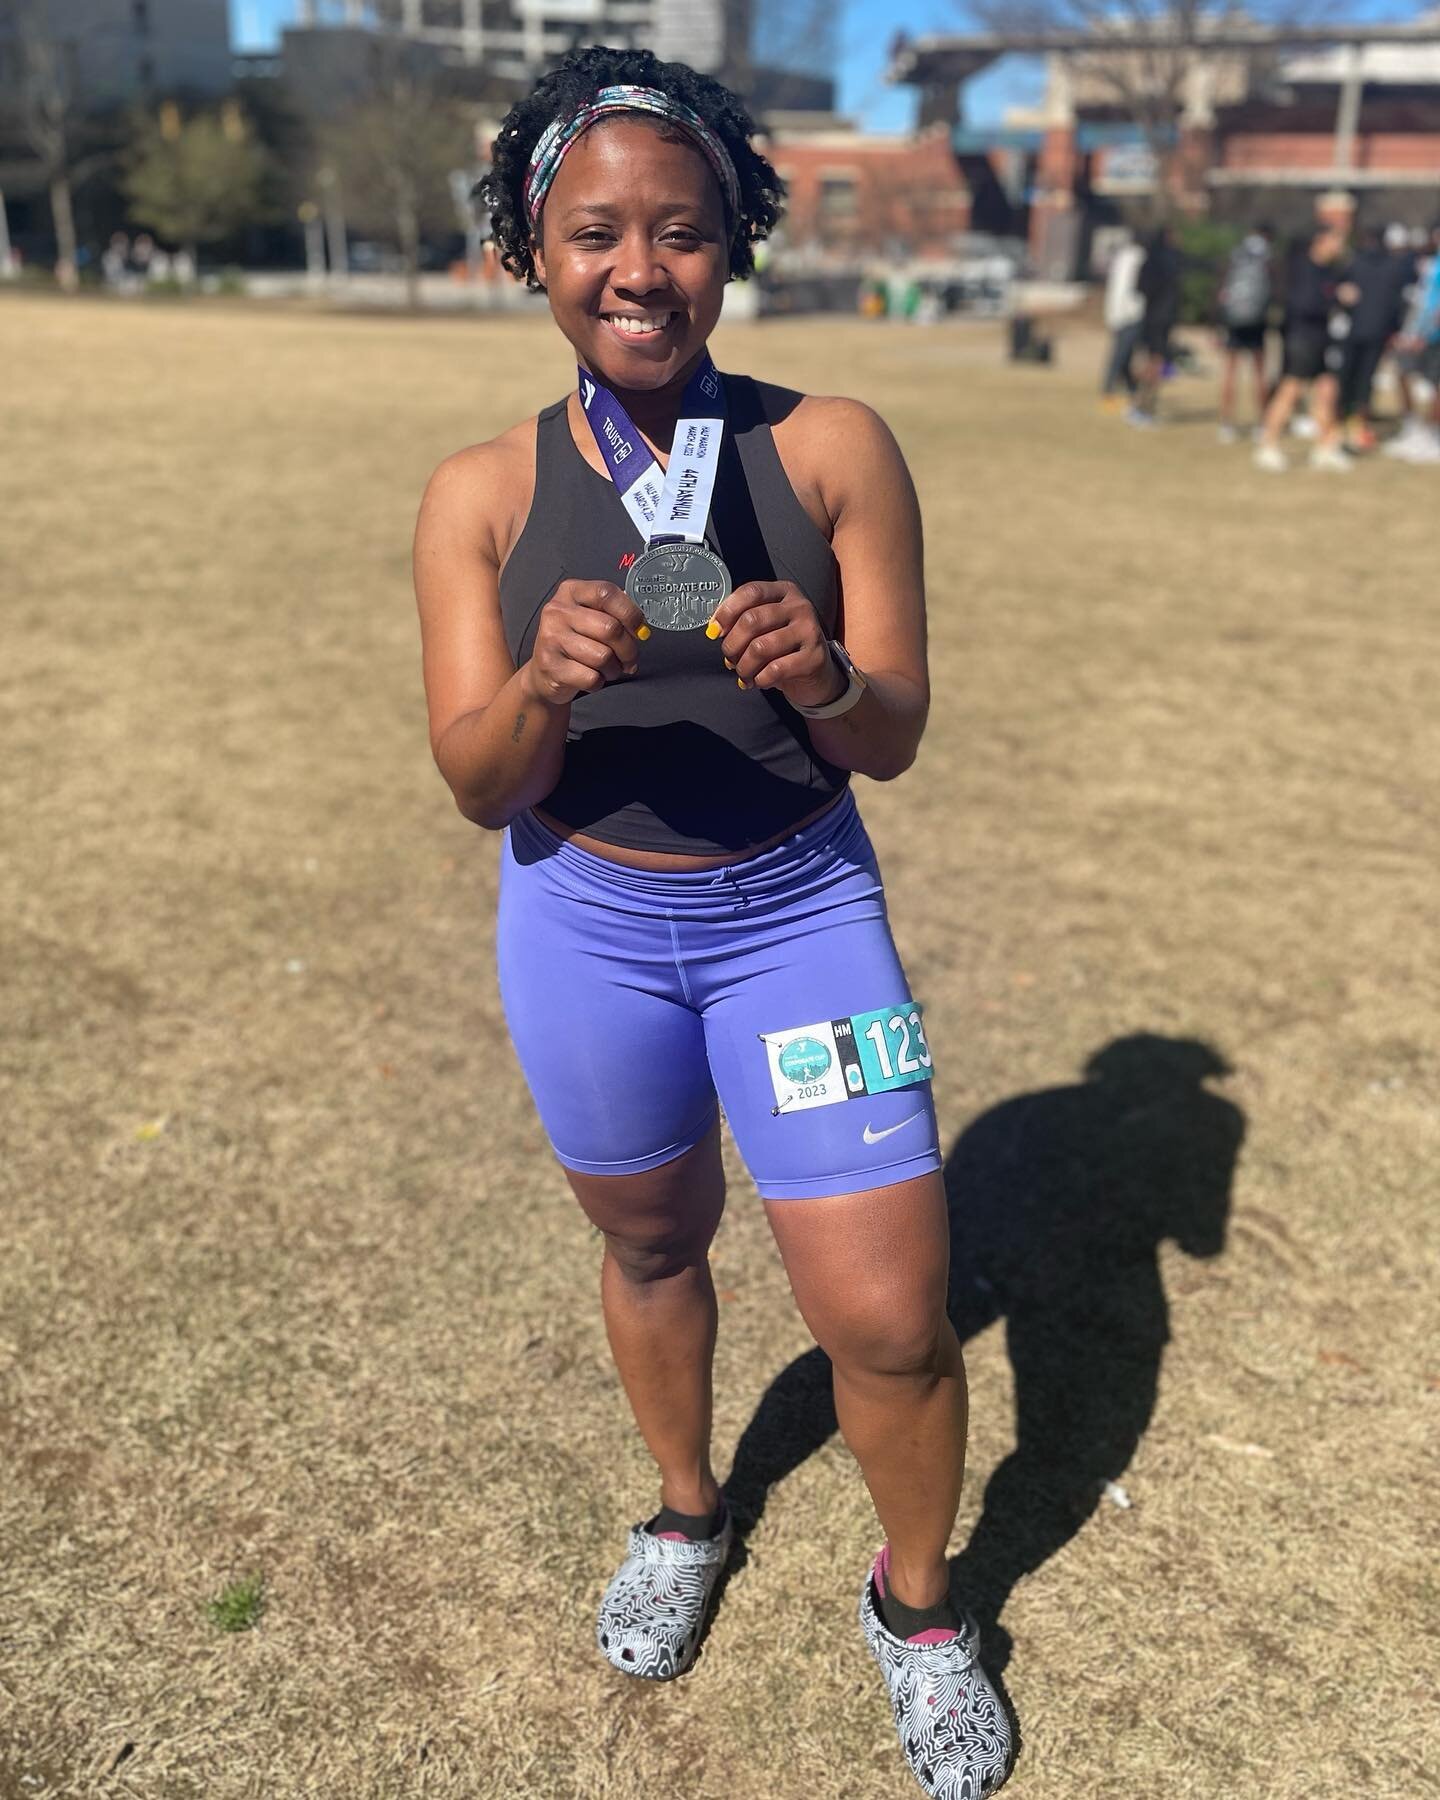 &ldquo;You don&rsquo;t become what you want, you become what you believe.&rdquo;
― Oprah Winfrey

Would I have imagined running a half marathon last year, No.

Would I have imagined that running would be part of my self-care, No.

I started running d